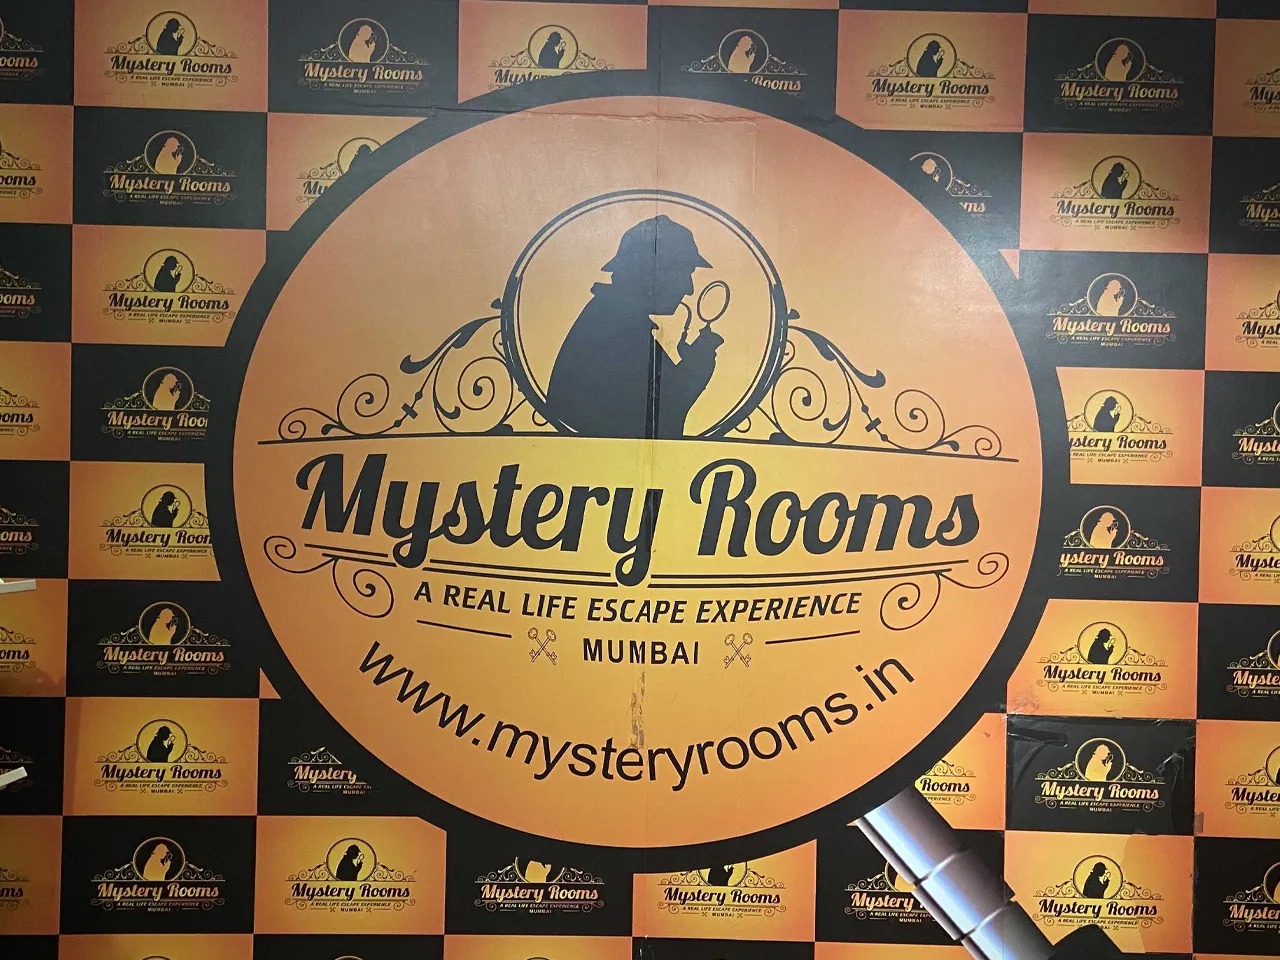 Were we able to escape the Mystery Rooms in Mumbai?